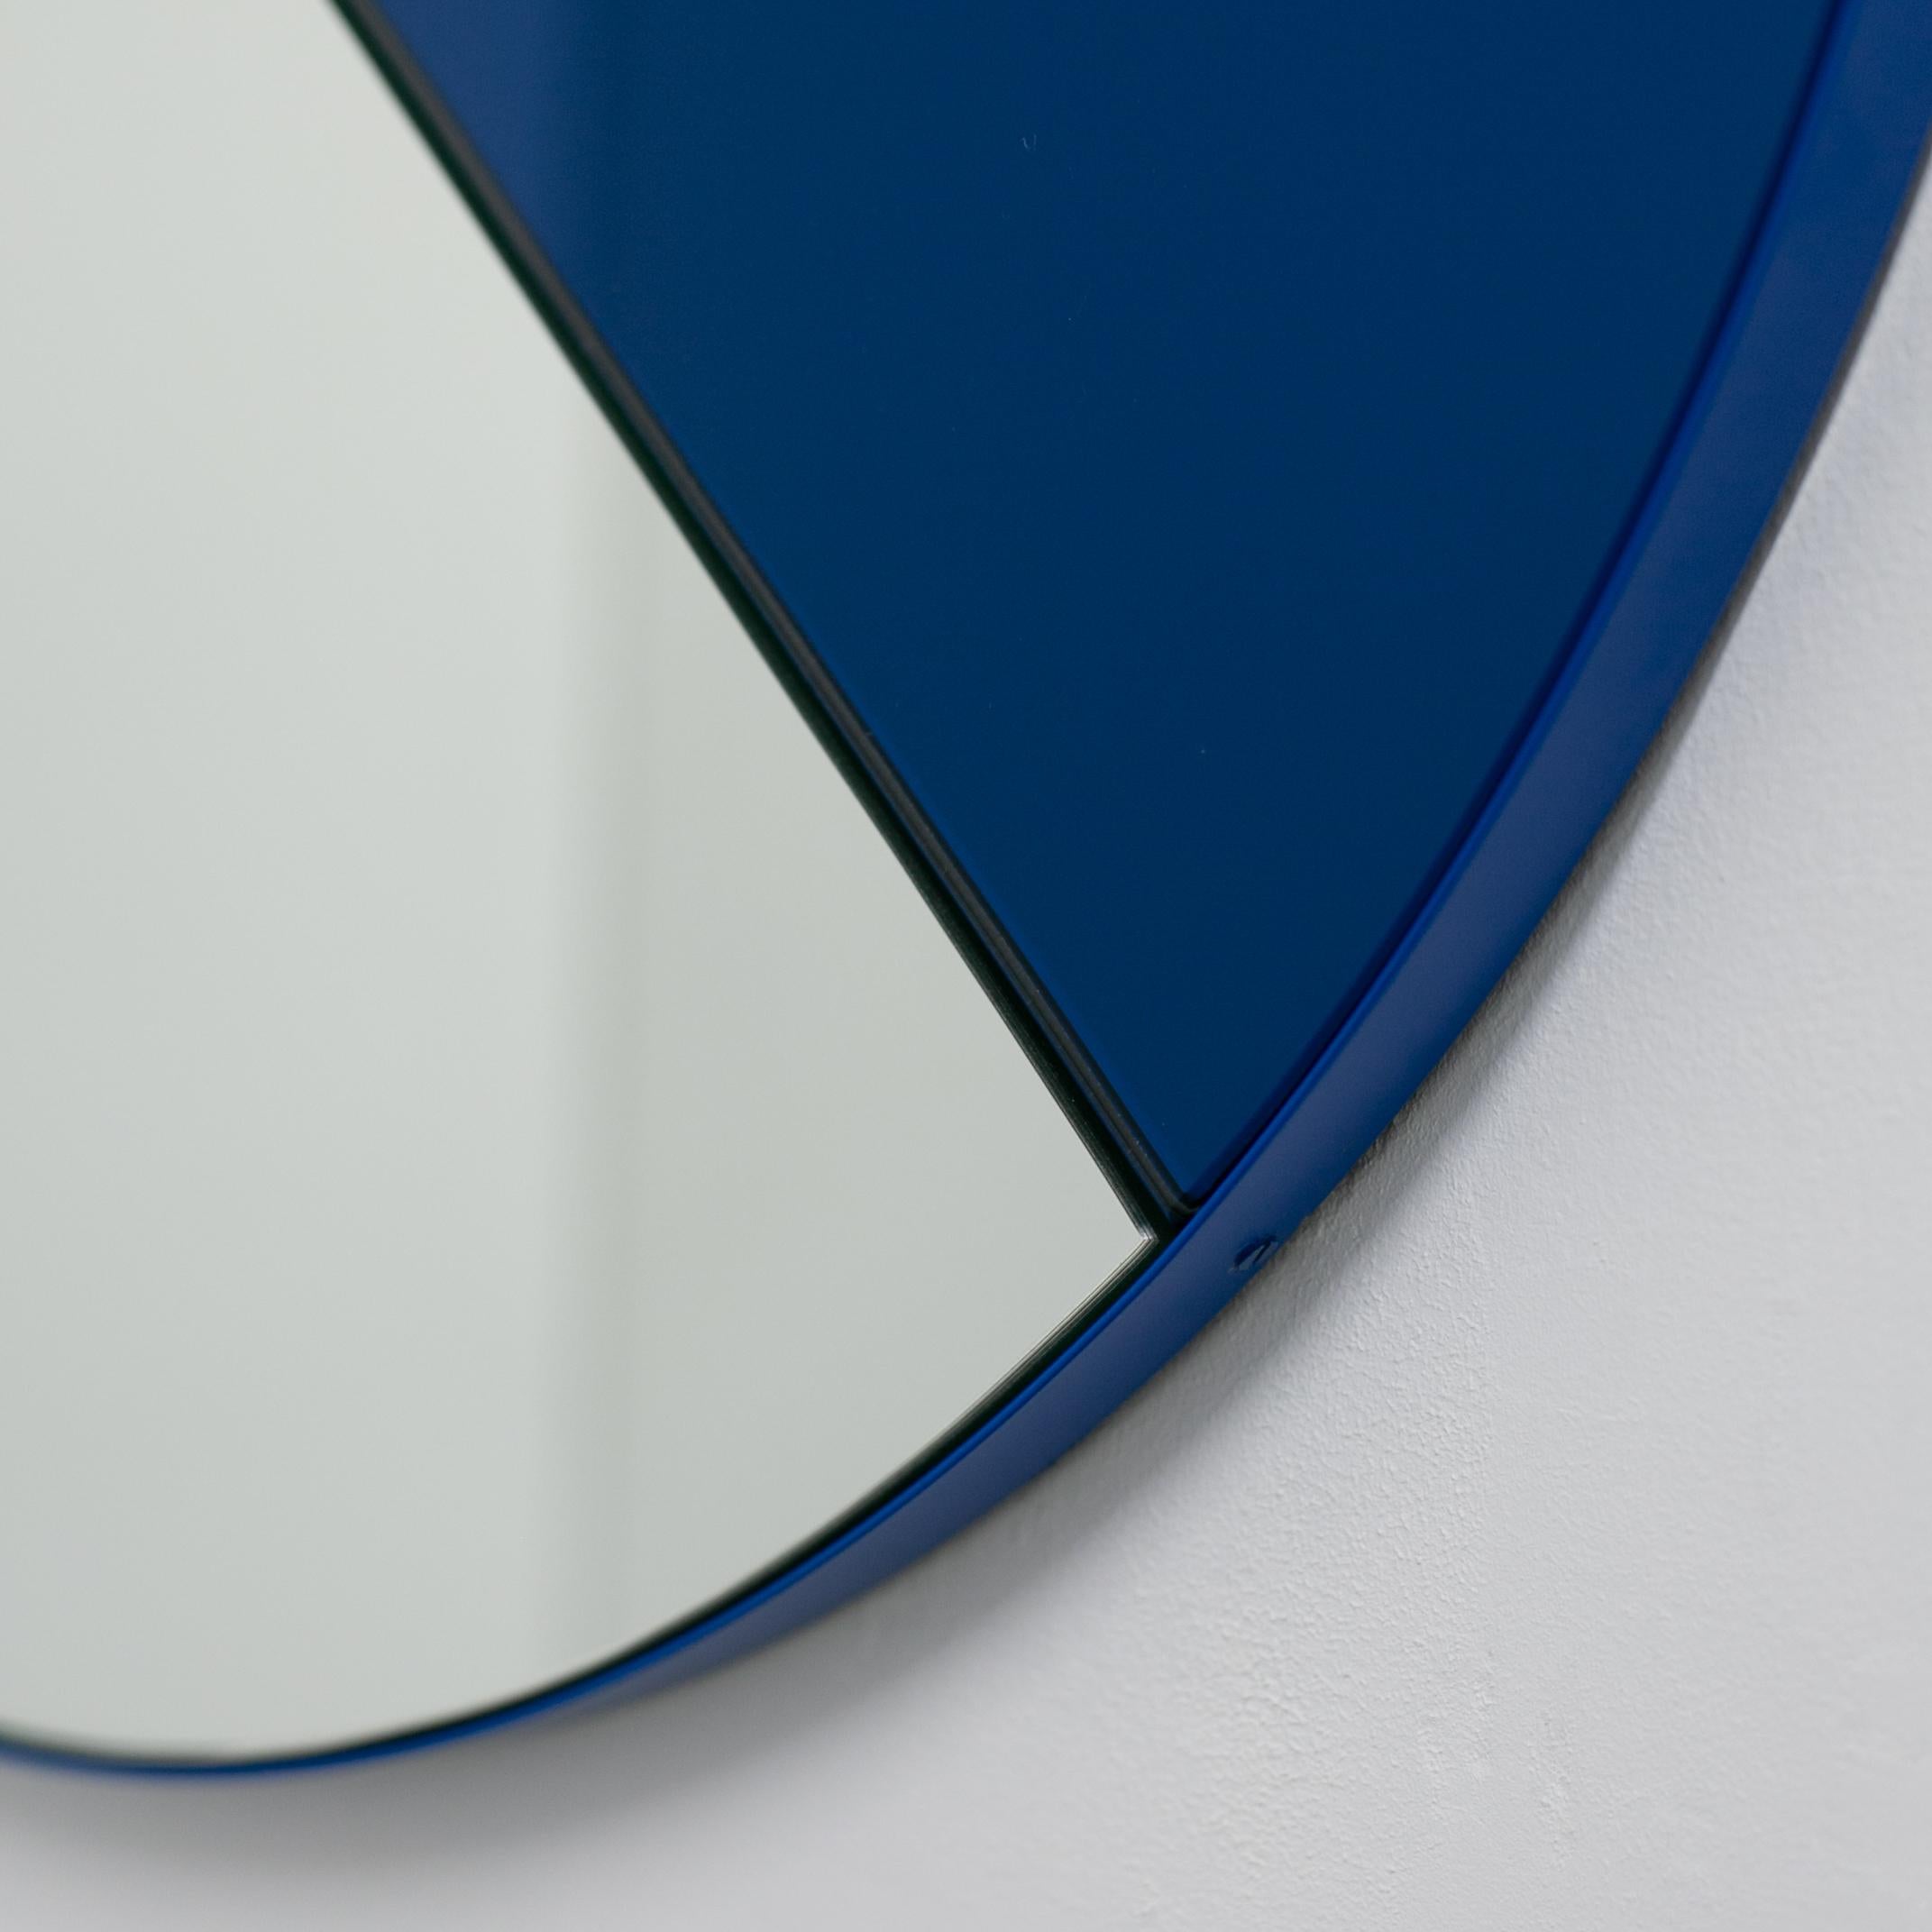 Orbis Dualis Mixed Blue Tinted Contemporary Round Mirror with Blue Frame, Small For Sale 7